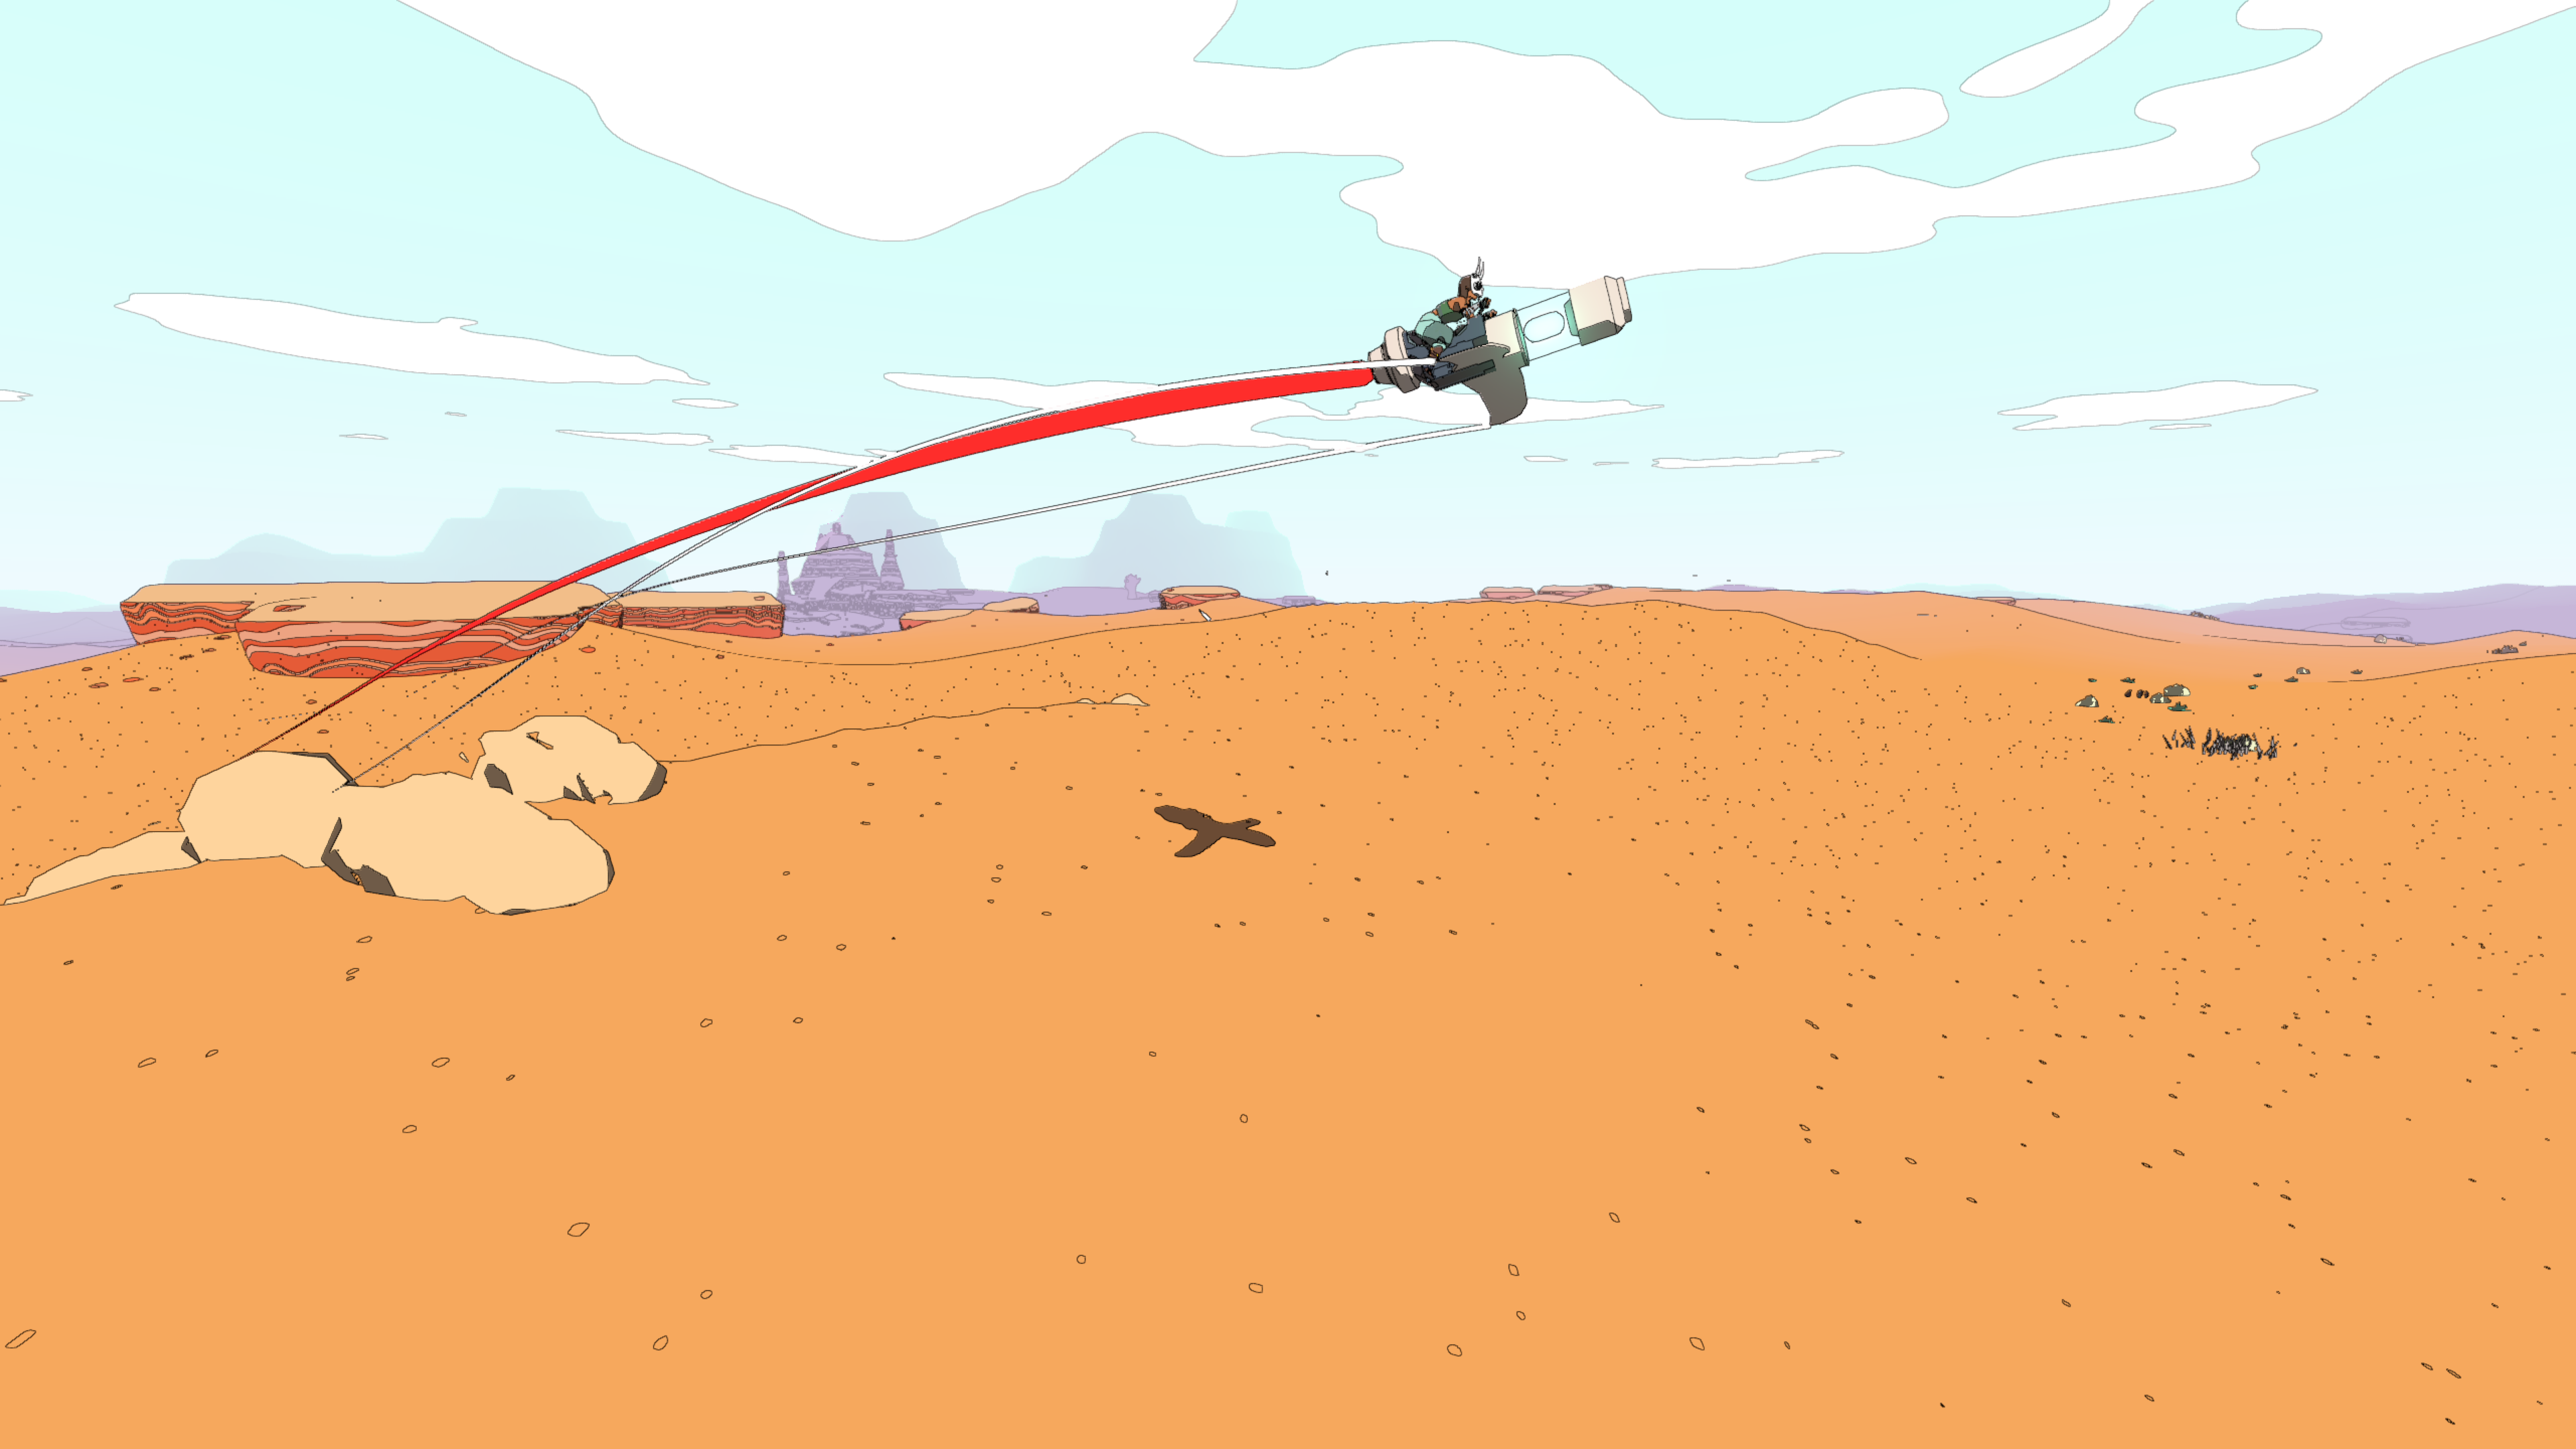 sable's glider bouncing up high over the desert and leaving a red trail behind it